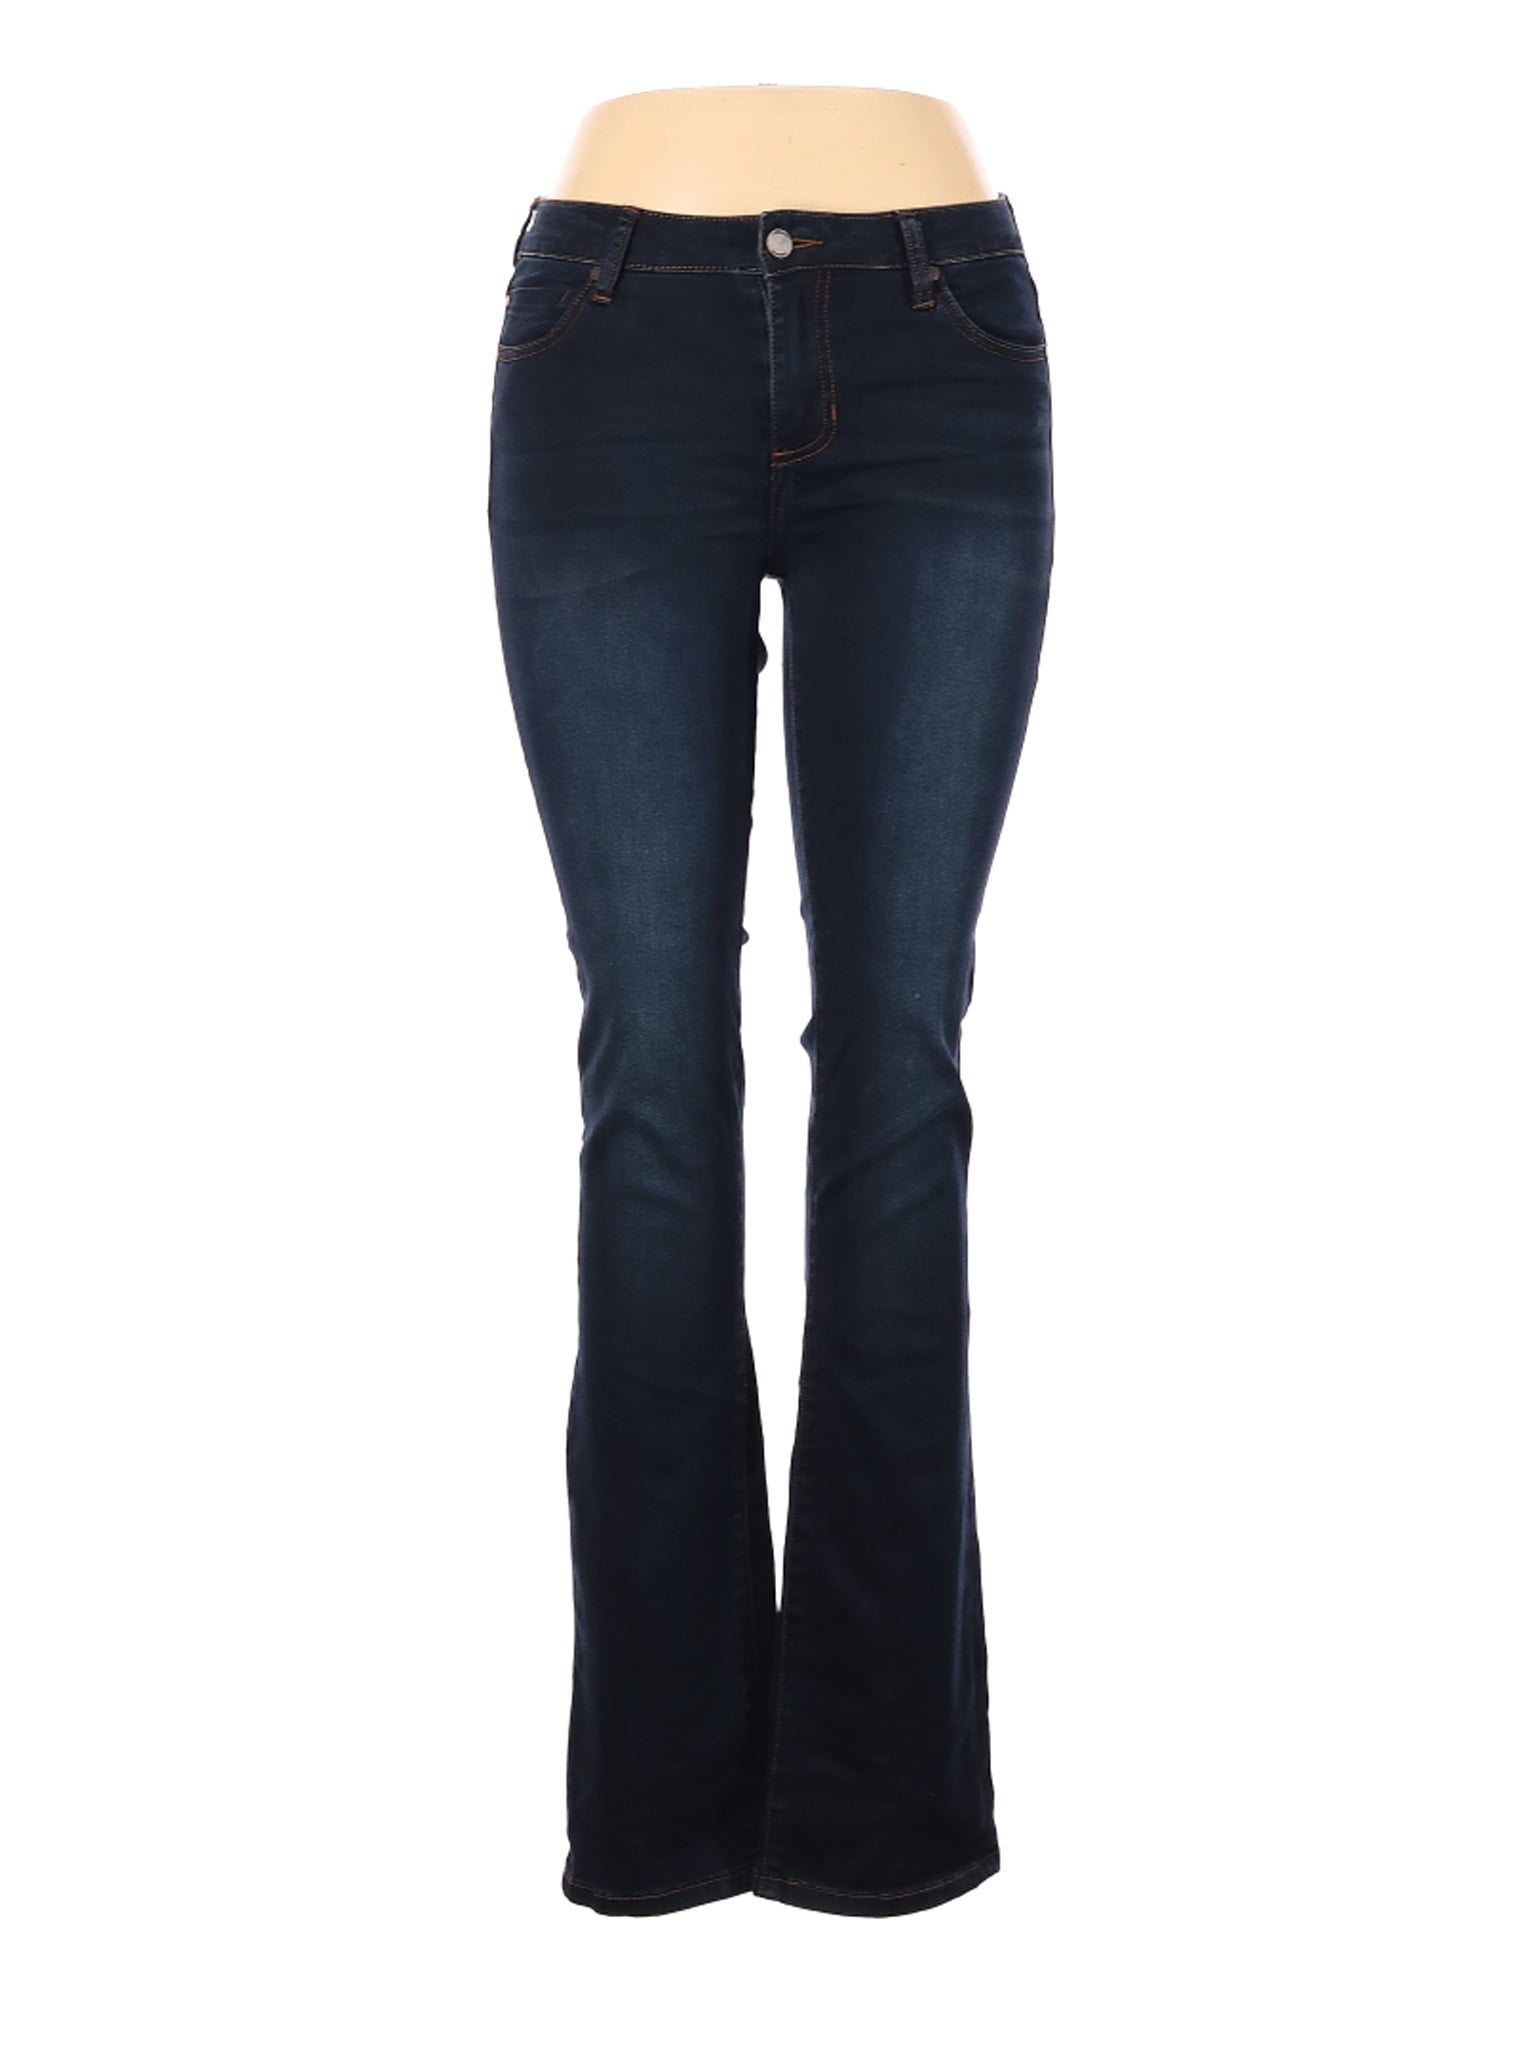 Liverpool Jeans - Pre-Owned Liverpool Jeans Company Women's Size 8 ...